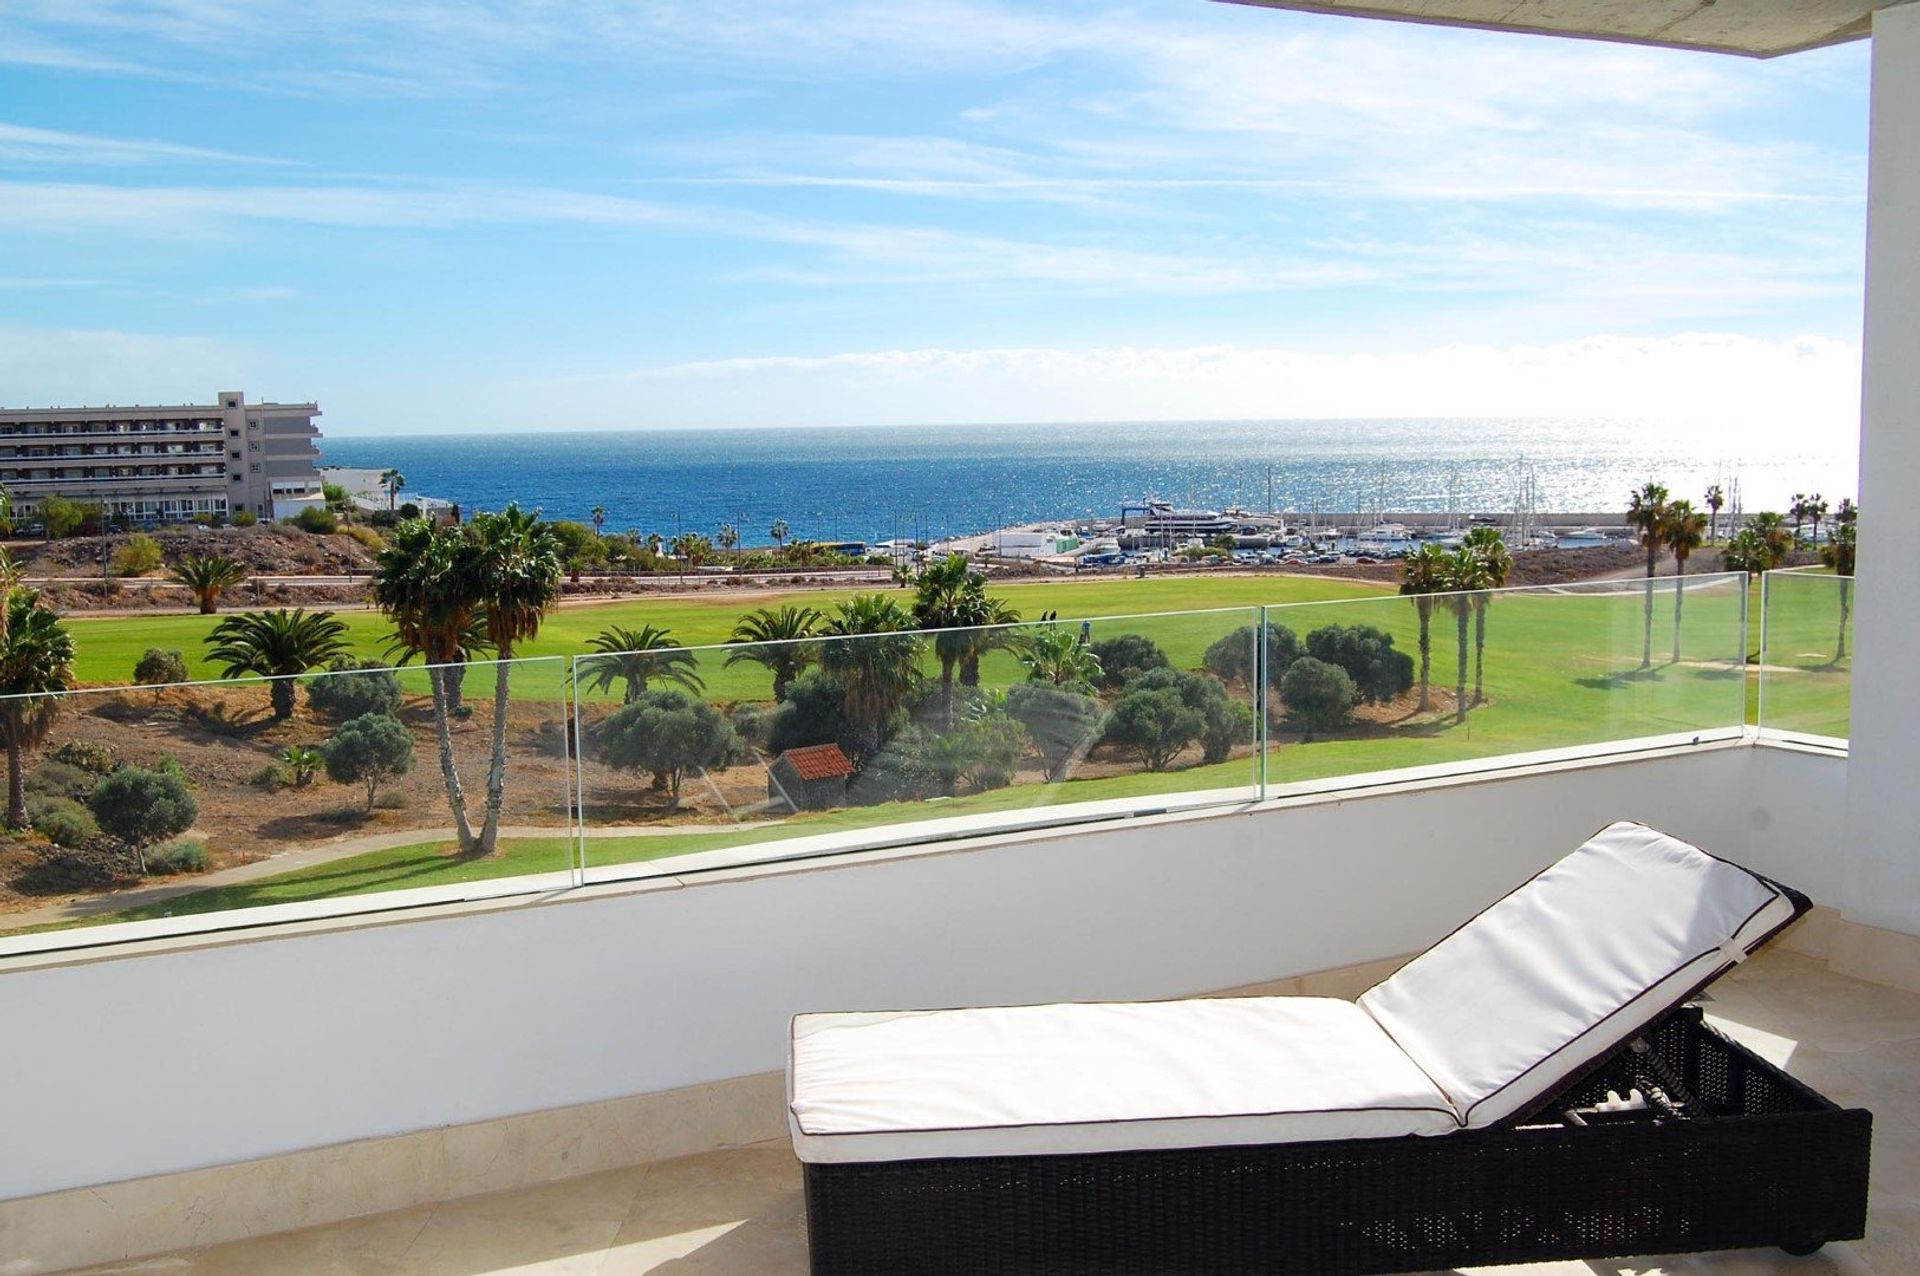 Watch your head! This penthouse apartment puts you in the middle of Amarilla golf course